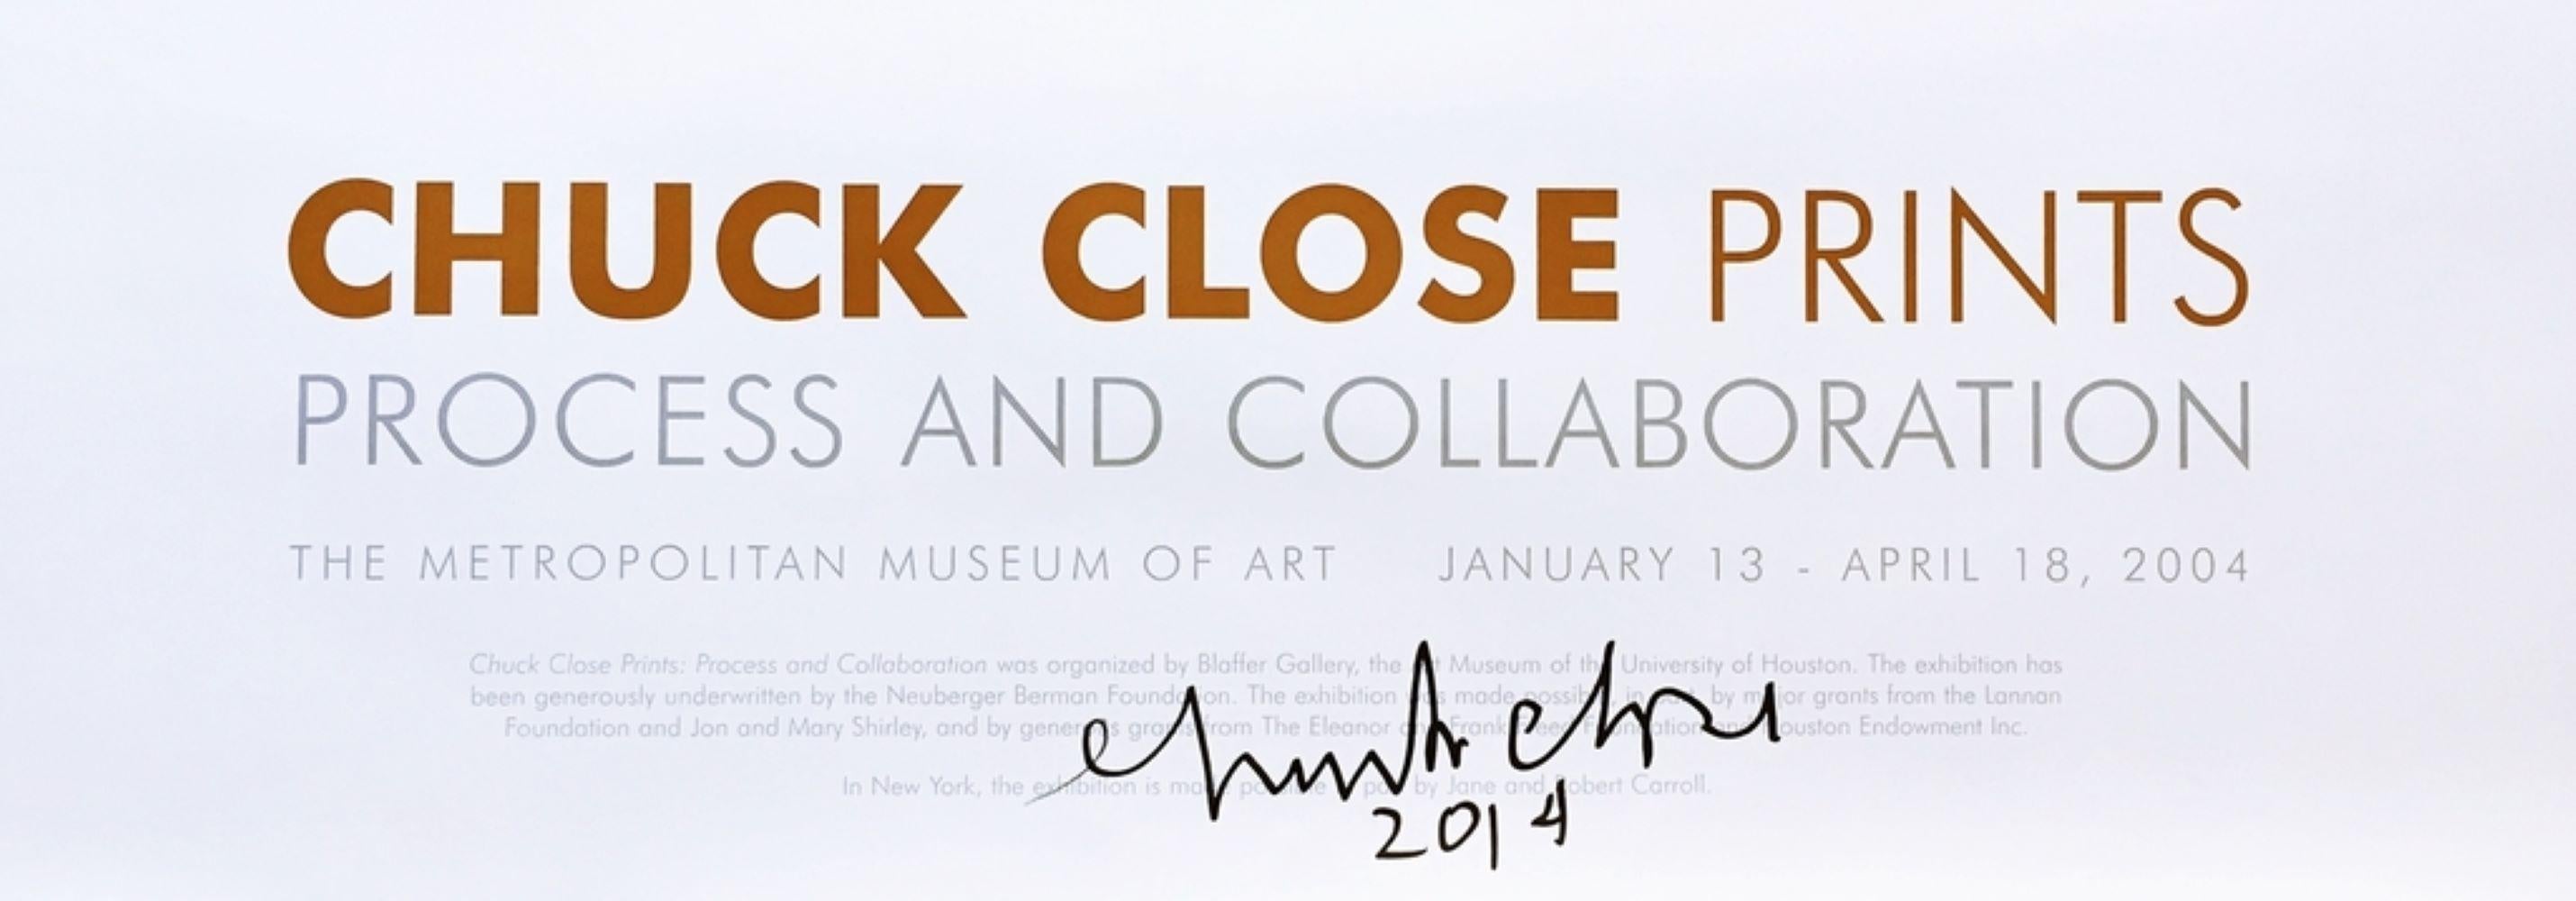 Process and Collaboration Met Museum poster (Hand Signed & dated by Chuck Close) For Sale 2